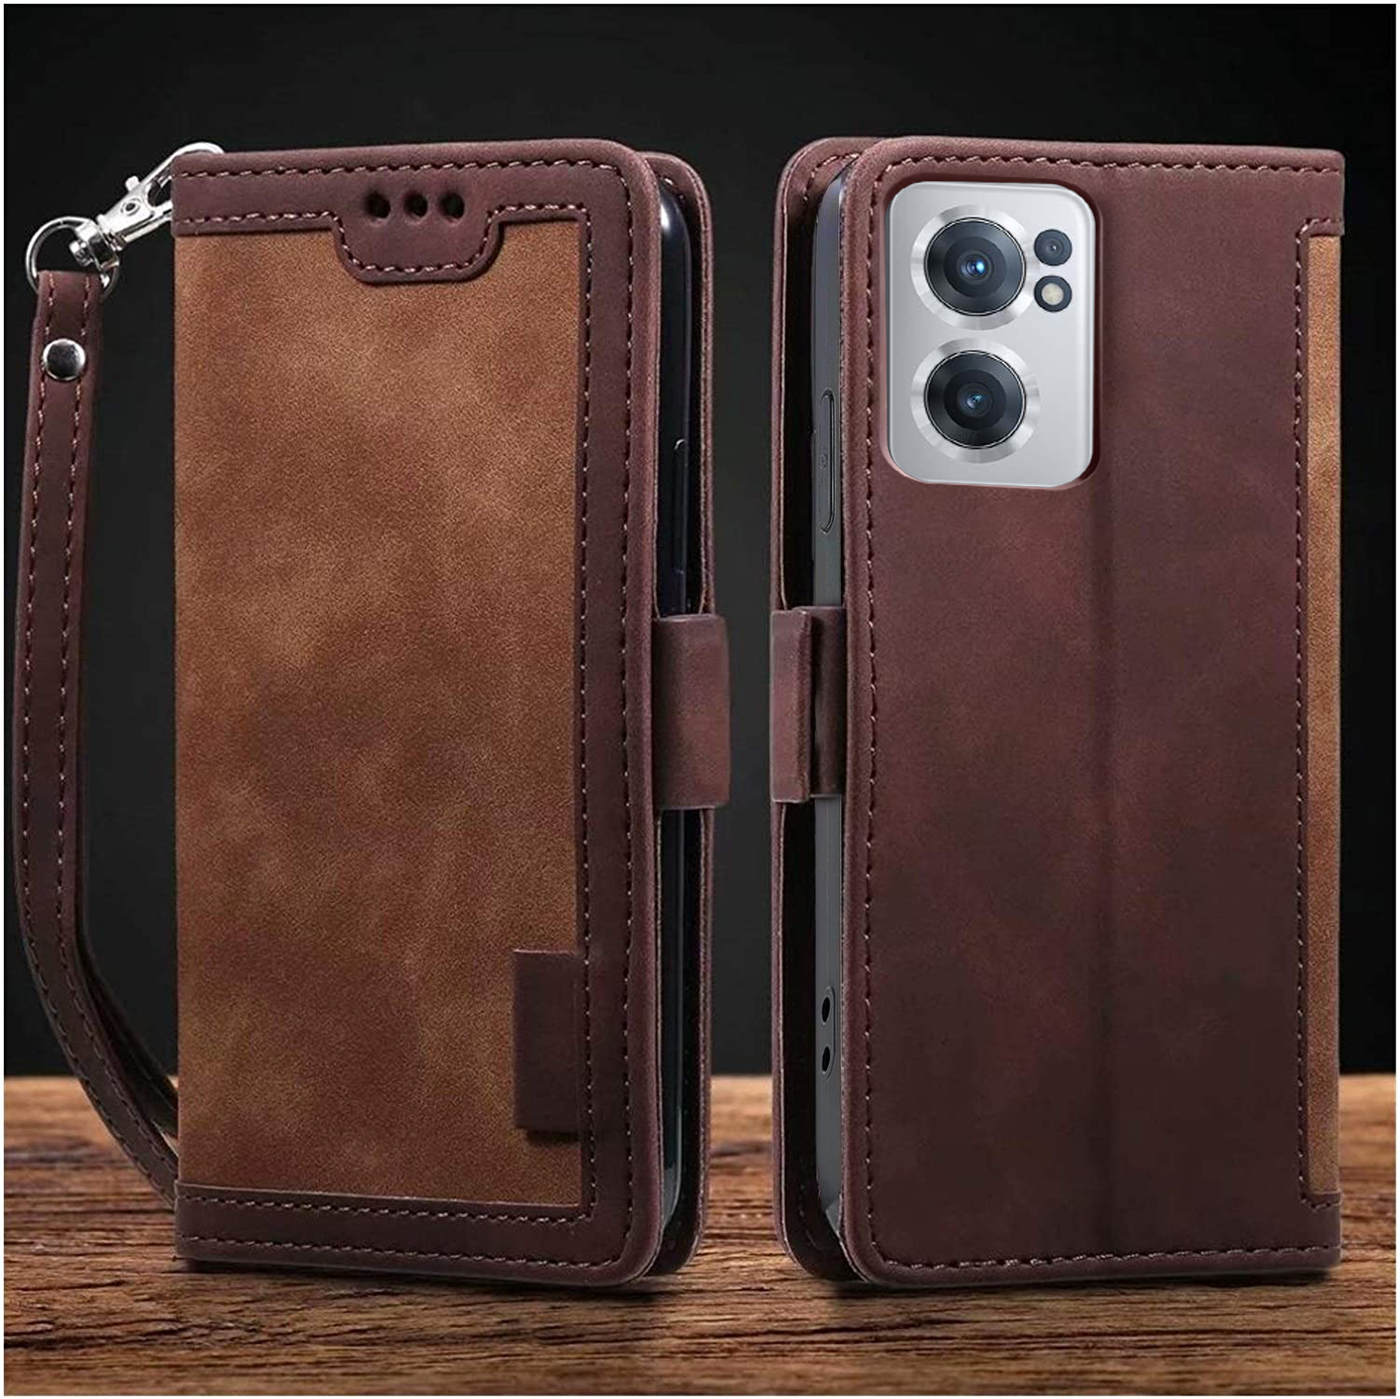 Oneplus Nord CE 2 Coffee color leather wallet flip cover case By excelsior